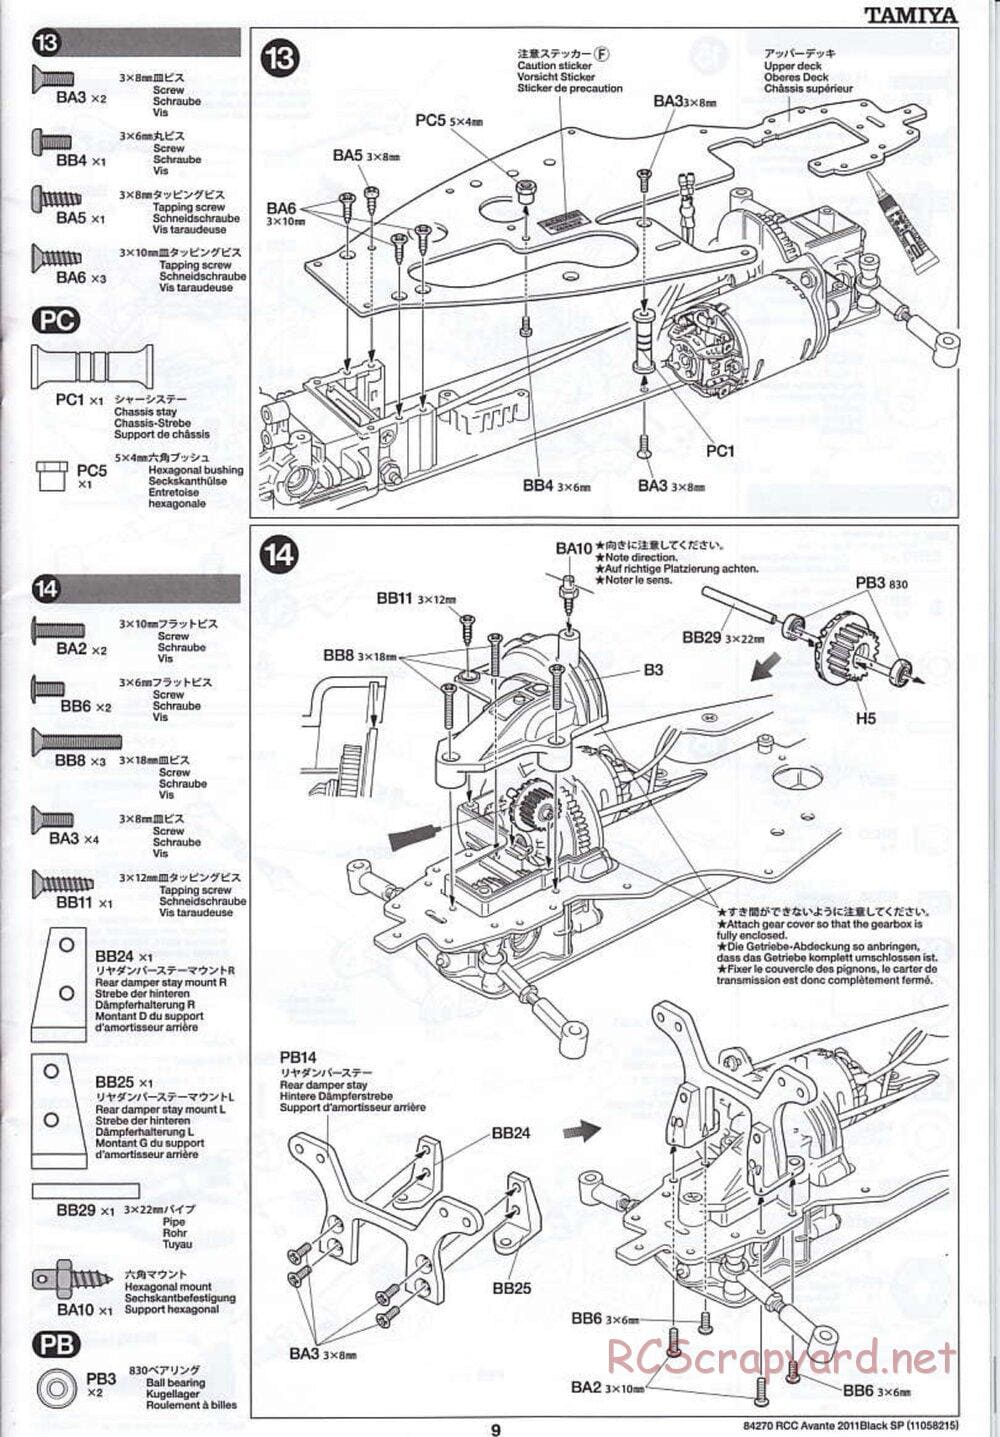 Tamiya - Avante 2011 - Black Special Chassis - Manual - Page 9